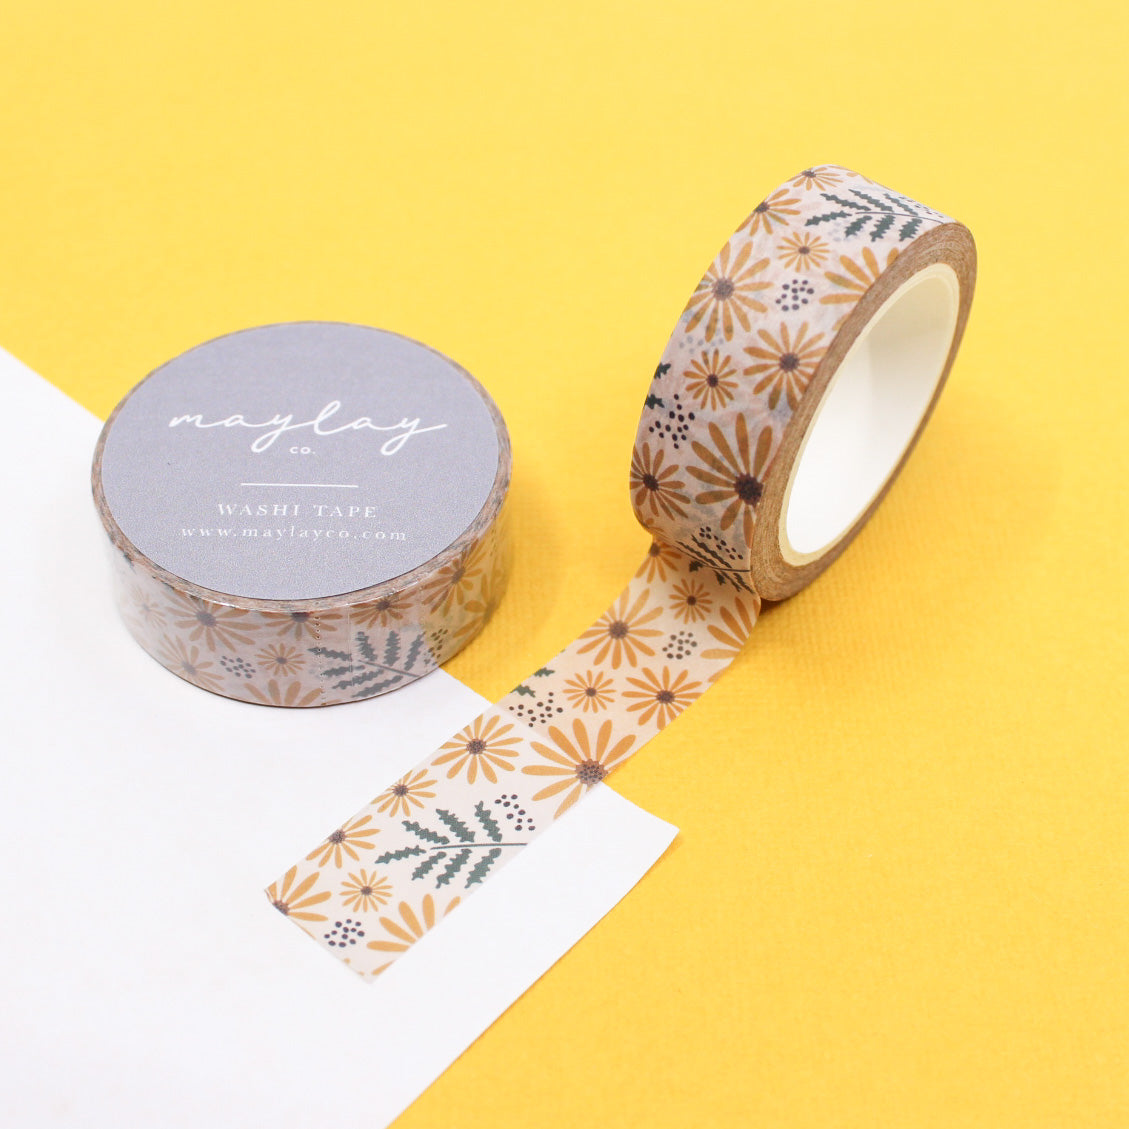 Say hello to creativity with our Hello Daisy Floral Washi Tape, adorned with charming daisy flower illustrations. Ideal for adding a friendly and floral touch to your projects. This tape is from Maylay and sold at BBB Supplies Craft Shop.